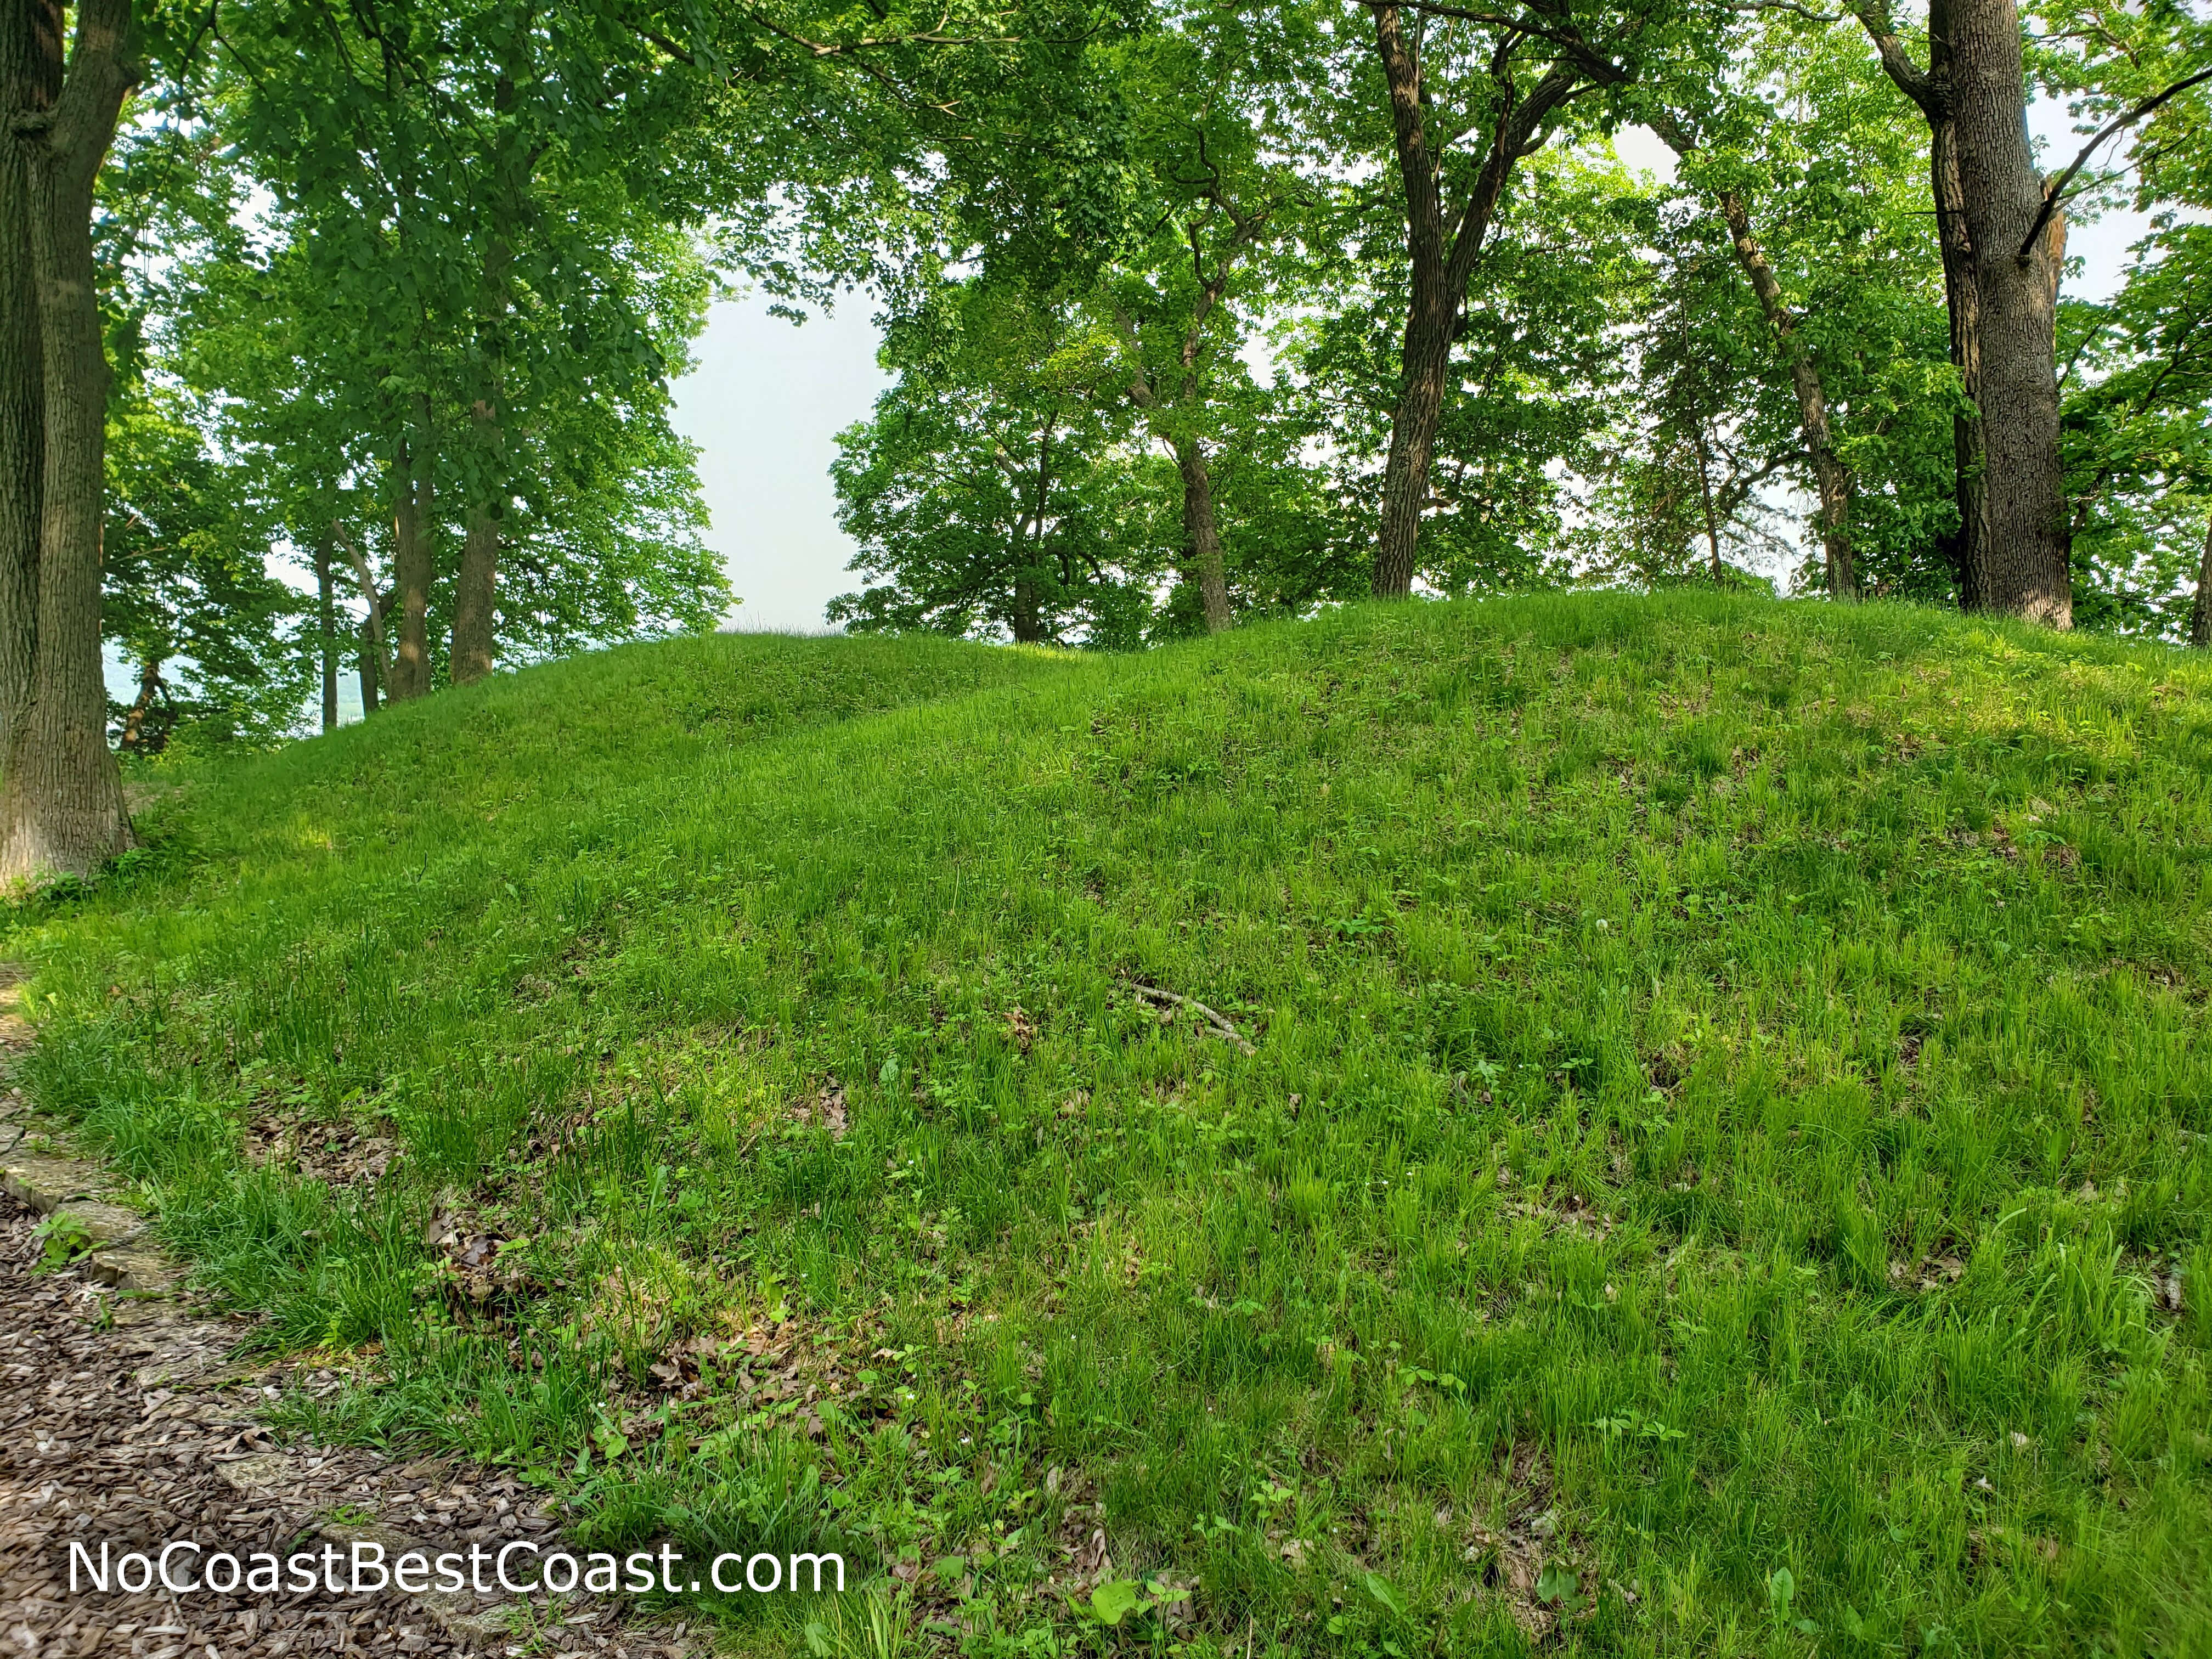 Just two of the many, many burial mounds along the trail